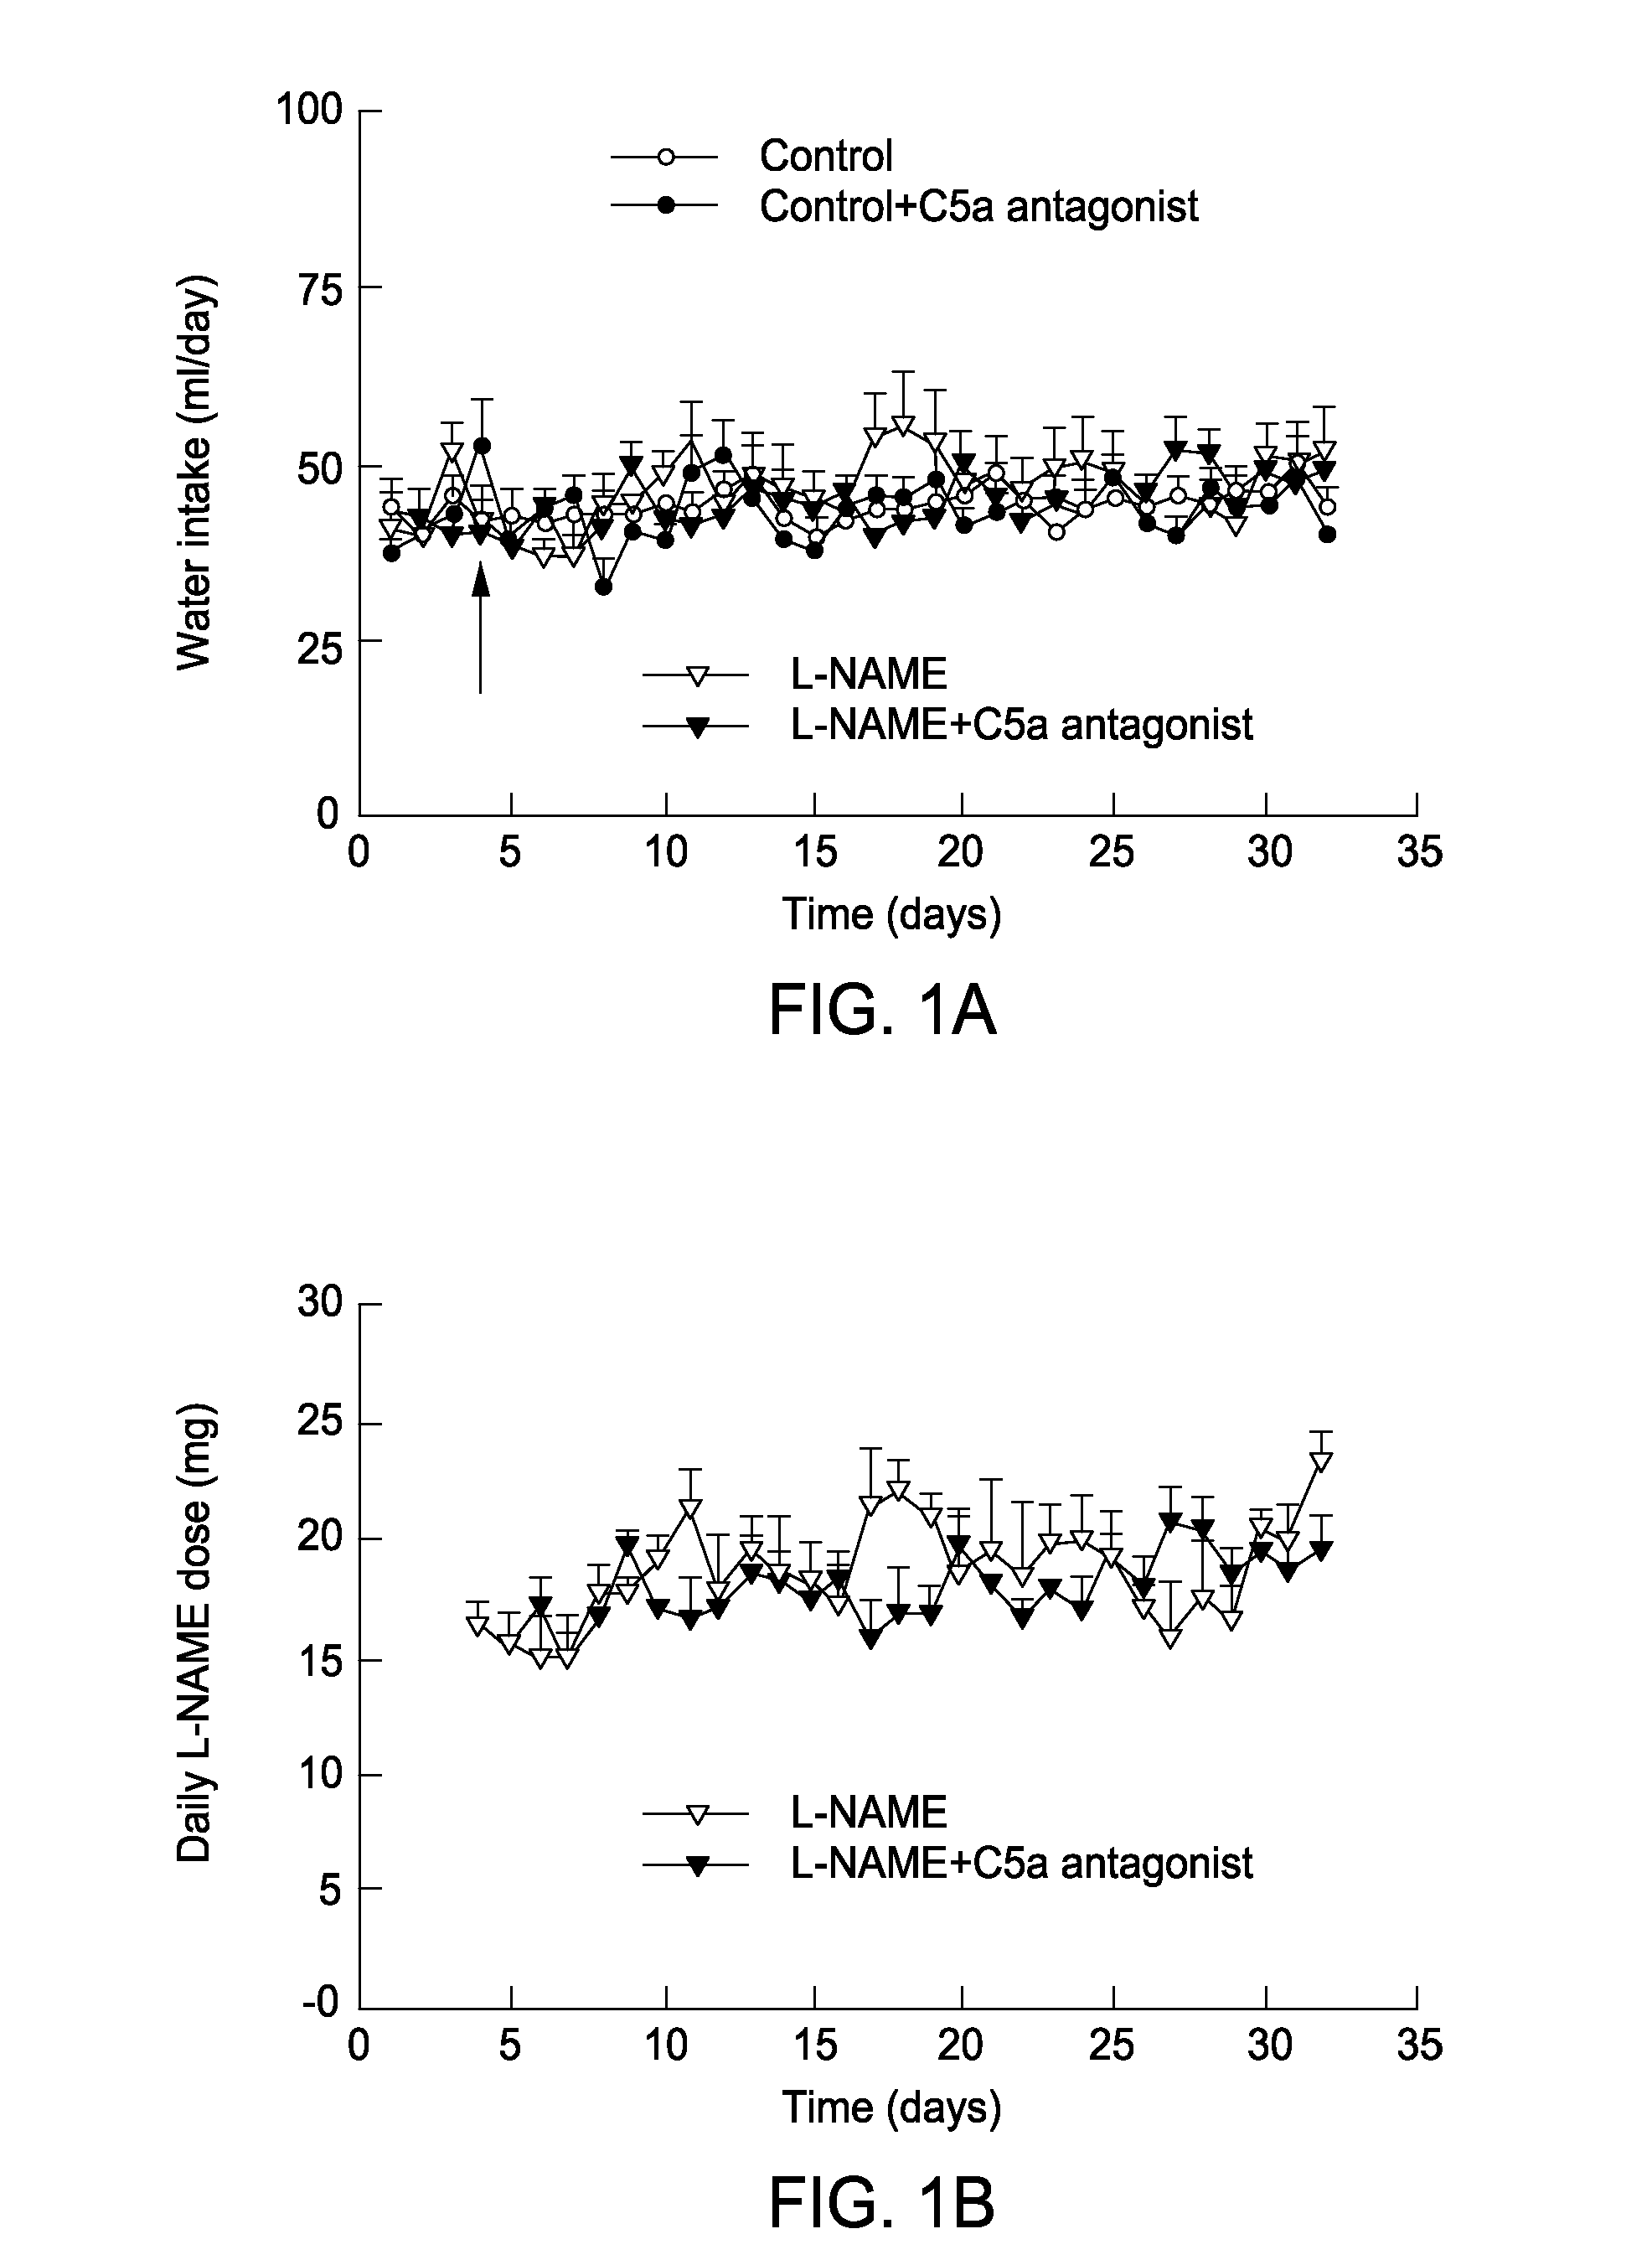 Use of C5A receptor antagonist in the treatment of fibrosis